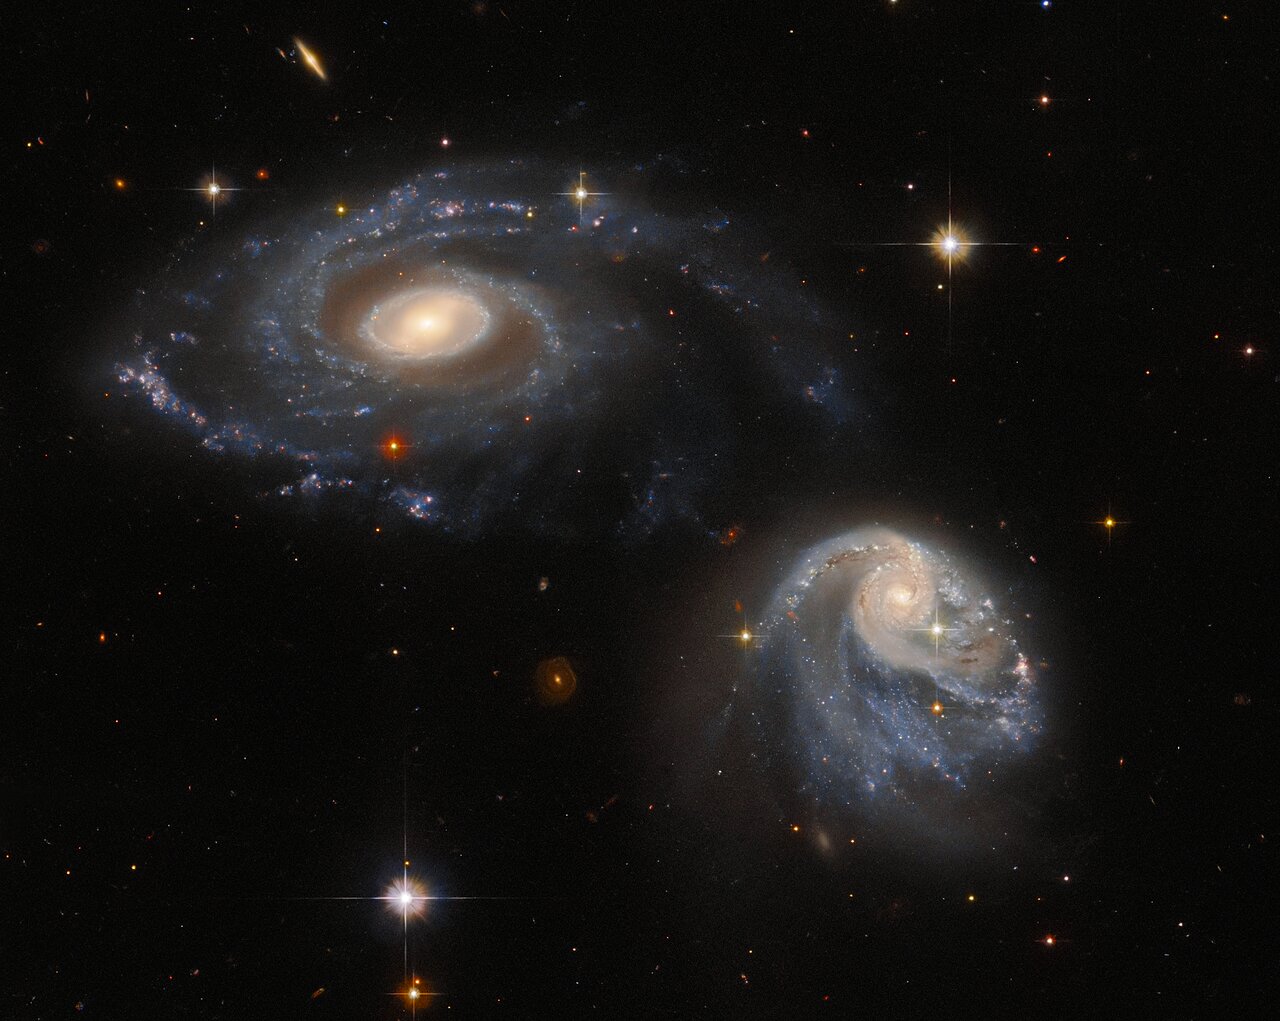 Two interacting galaxies warped by gravity in Hubble image